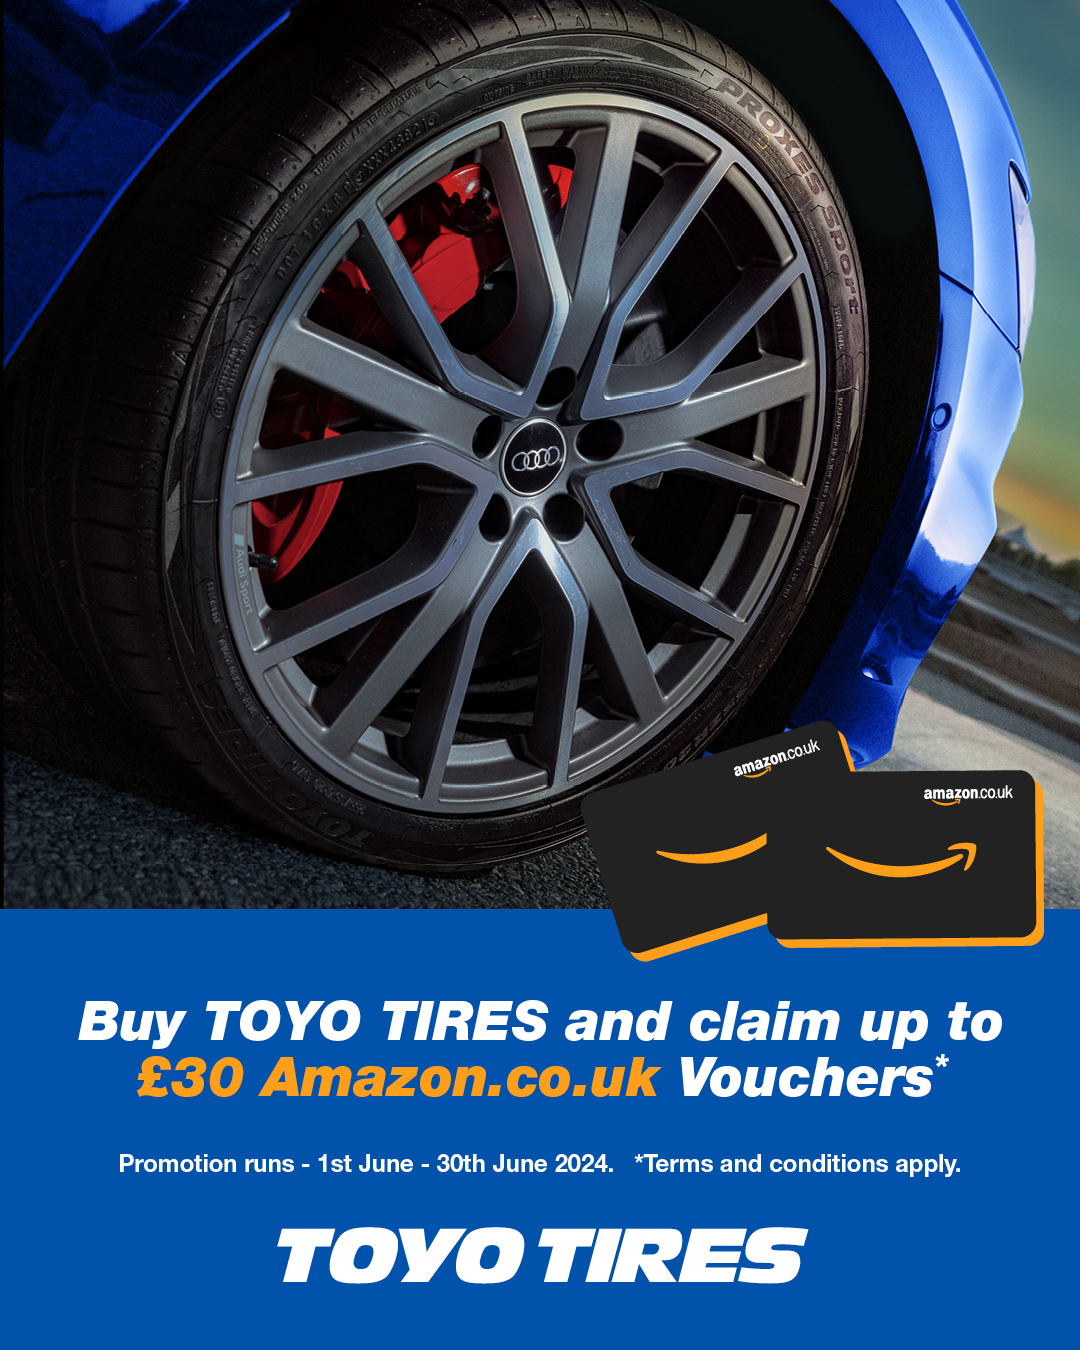 BUY TOYO TYRES IN JUNE AND CLAIM UP TO 